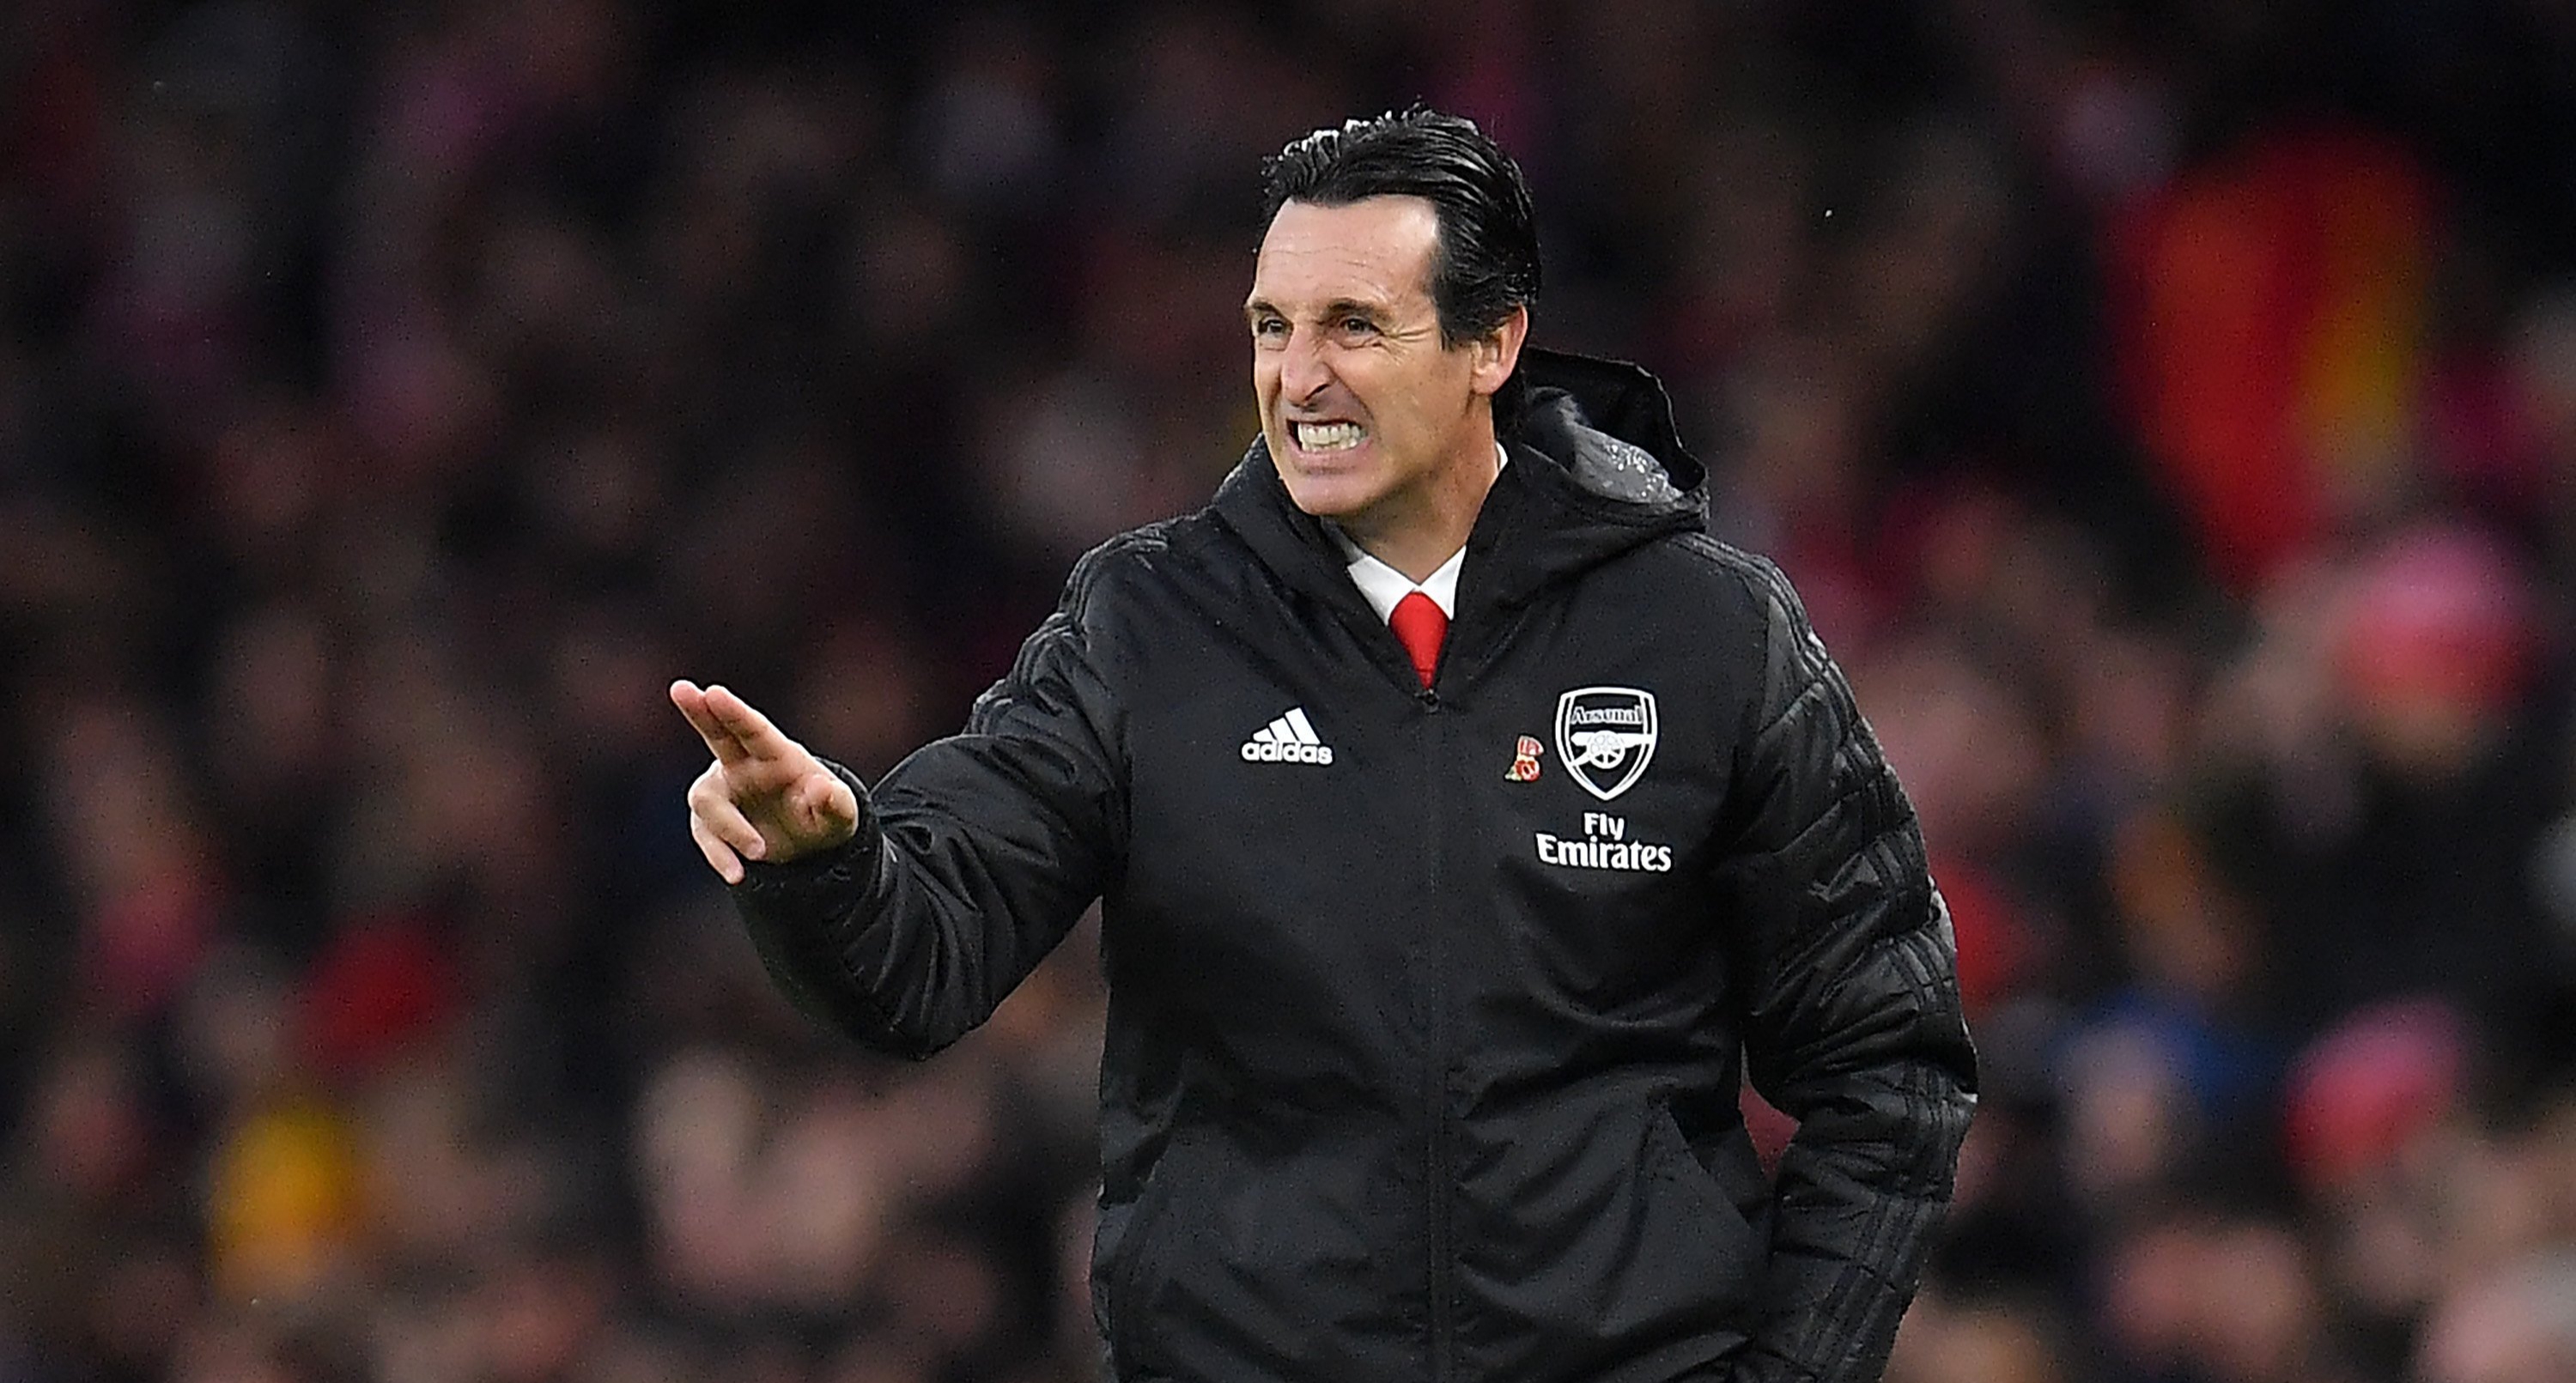 Unai Emery’s bizarre response to Arsenal’s draw with Wolves: Tactically it worked!